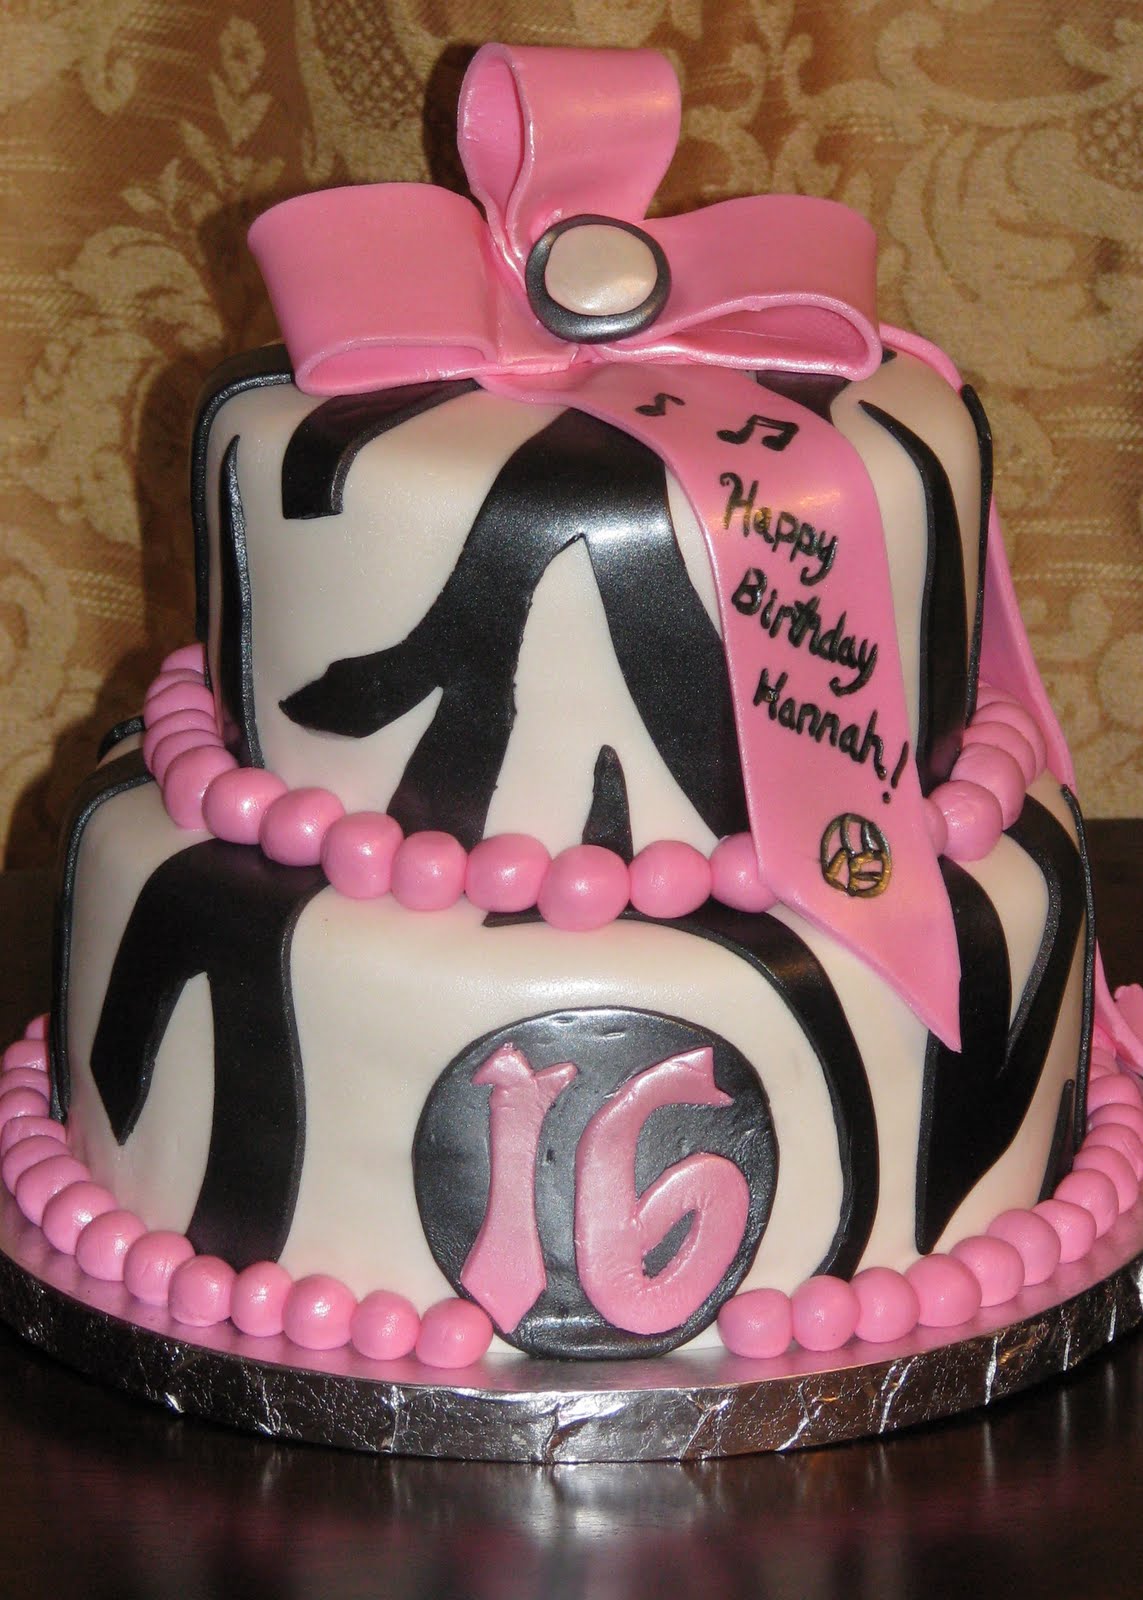 cool cakes Zebra Cake fit for a Sweet 16 Birthday